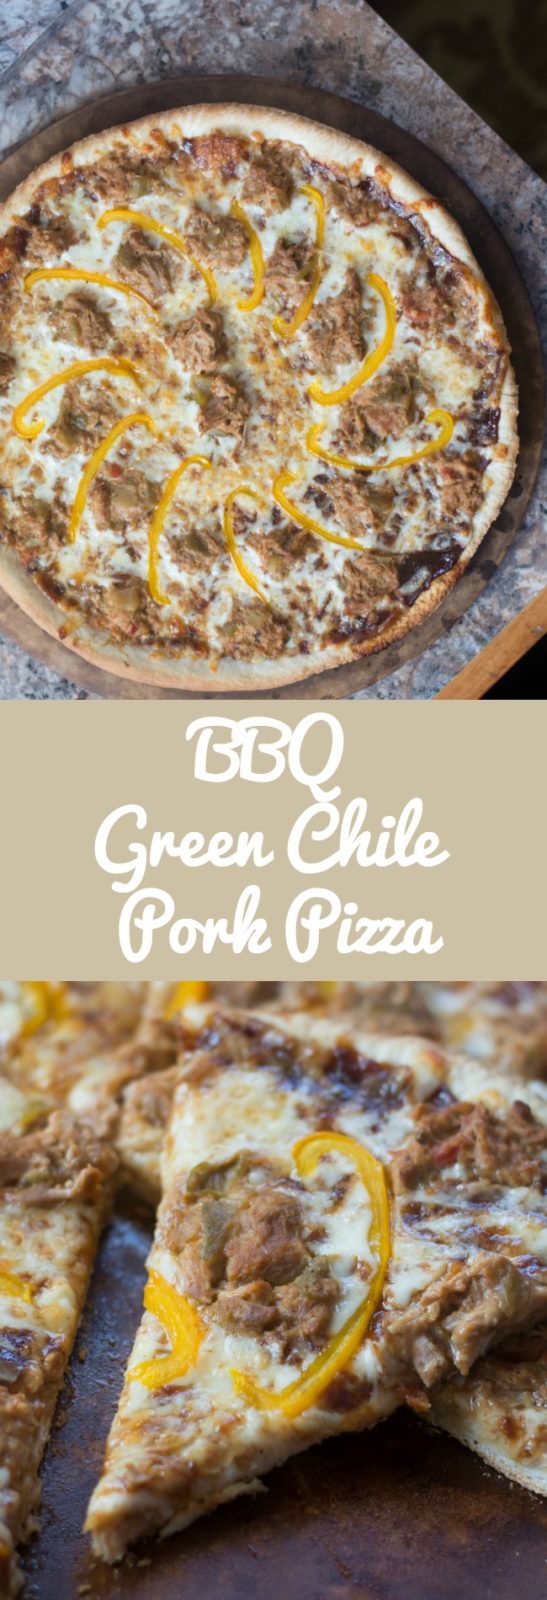 Looking for a non-traditional pizza? This BBQ green chile pork pizza is sweet and spicy and so easy to make!